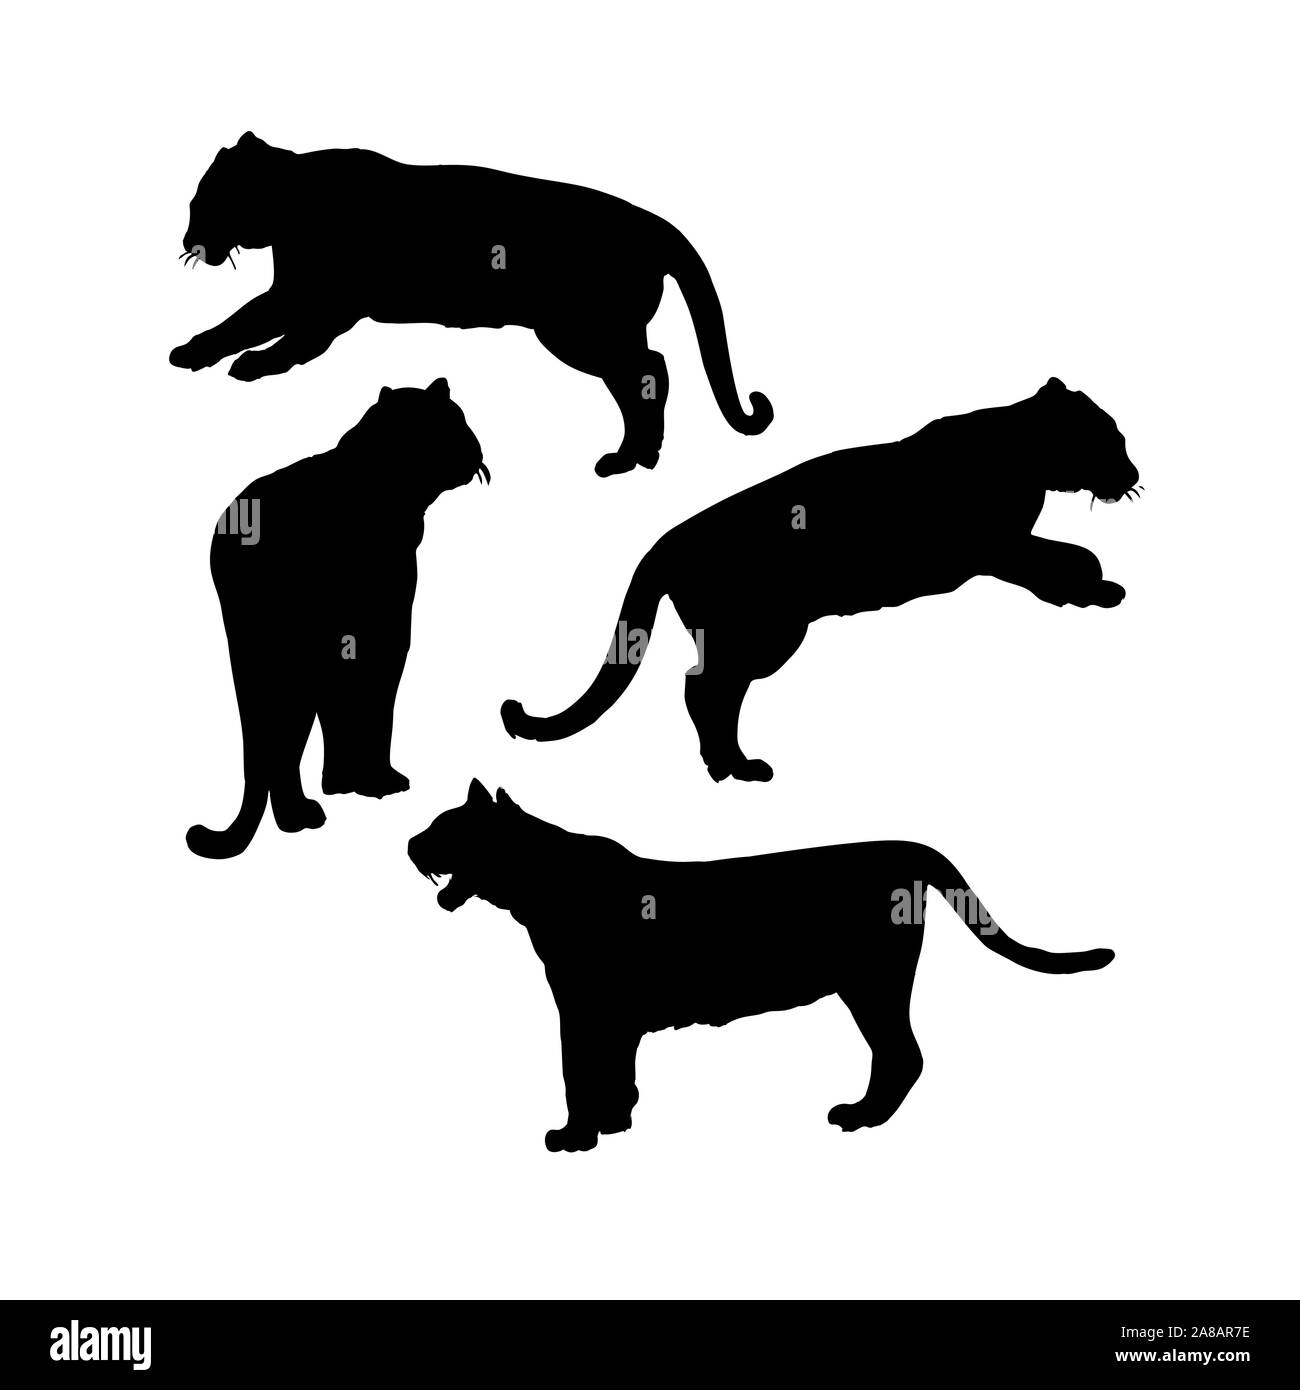 Wild Tiger Silhouettes Isolated Vector Set. Safari Animals Clipart for Print or Laser Cutting Design Stock Vector